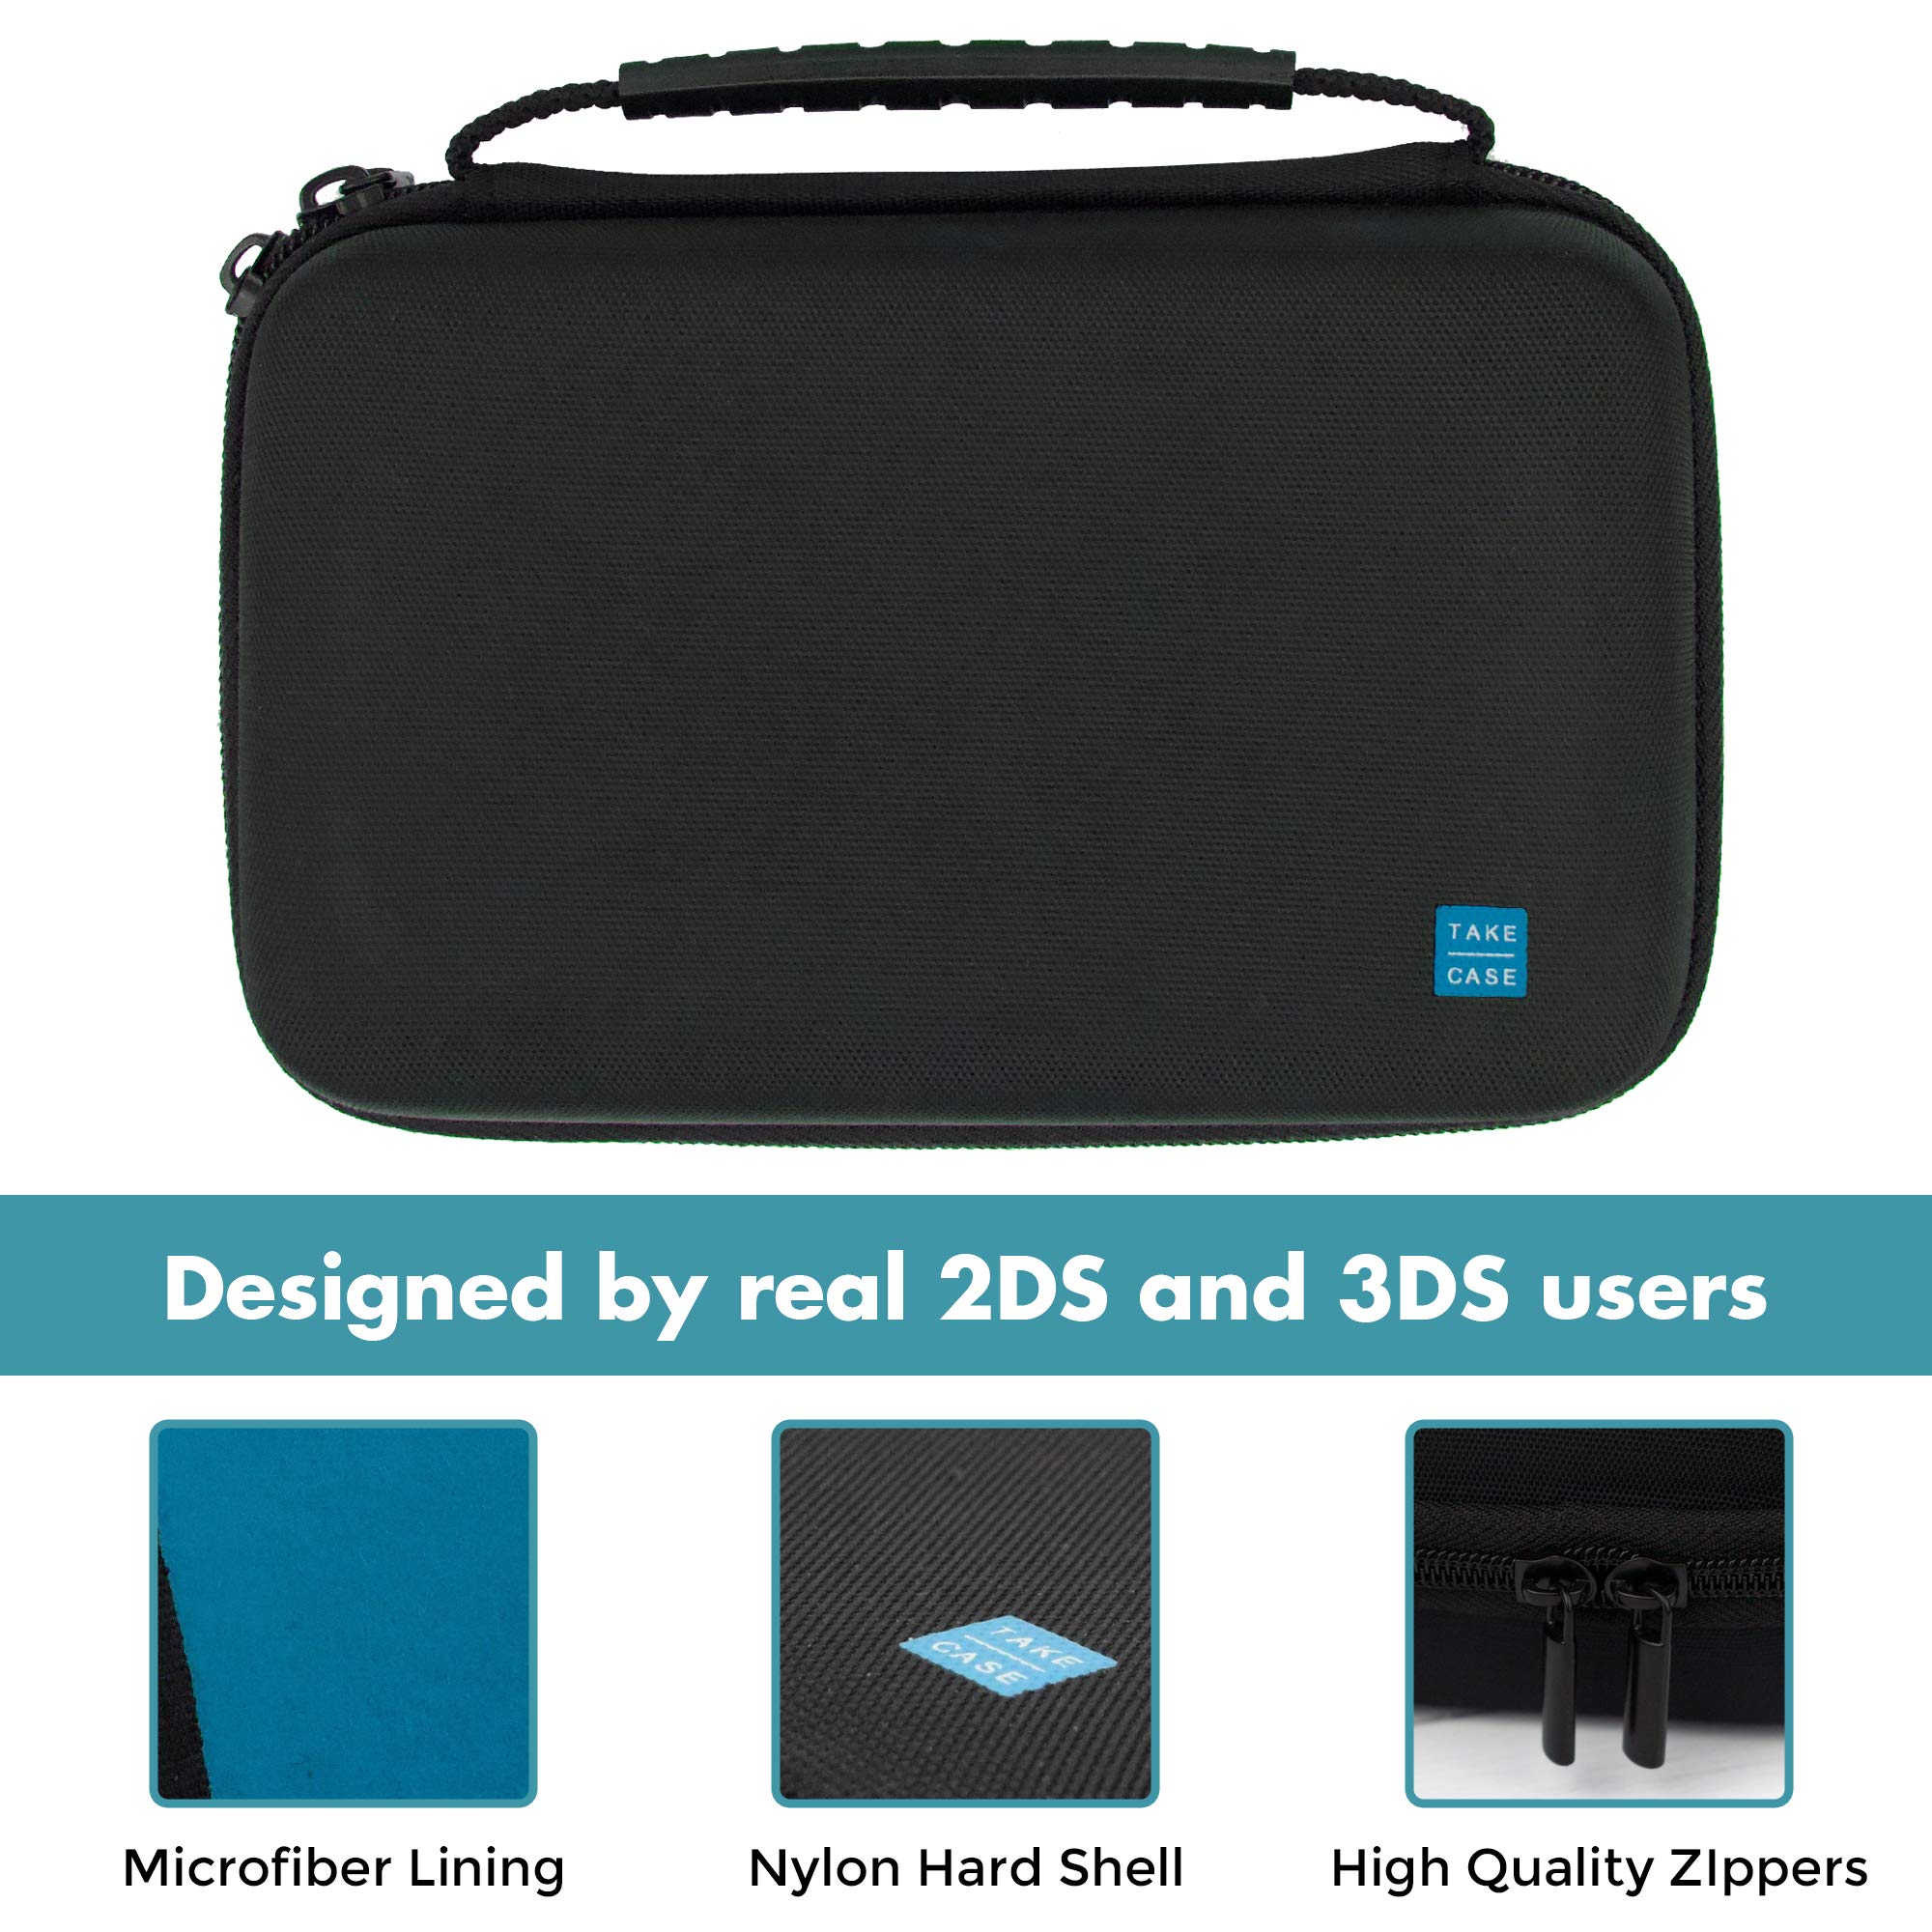 TAKECASE Hard Shell Carrying Case - Compatible with Nintendo 3DS XL and 2DS XL - Fits 16 Game Cards and Wall Charger - Includes Removable Accessories Pouch and Extra Large Stylus Light Blue